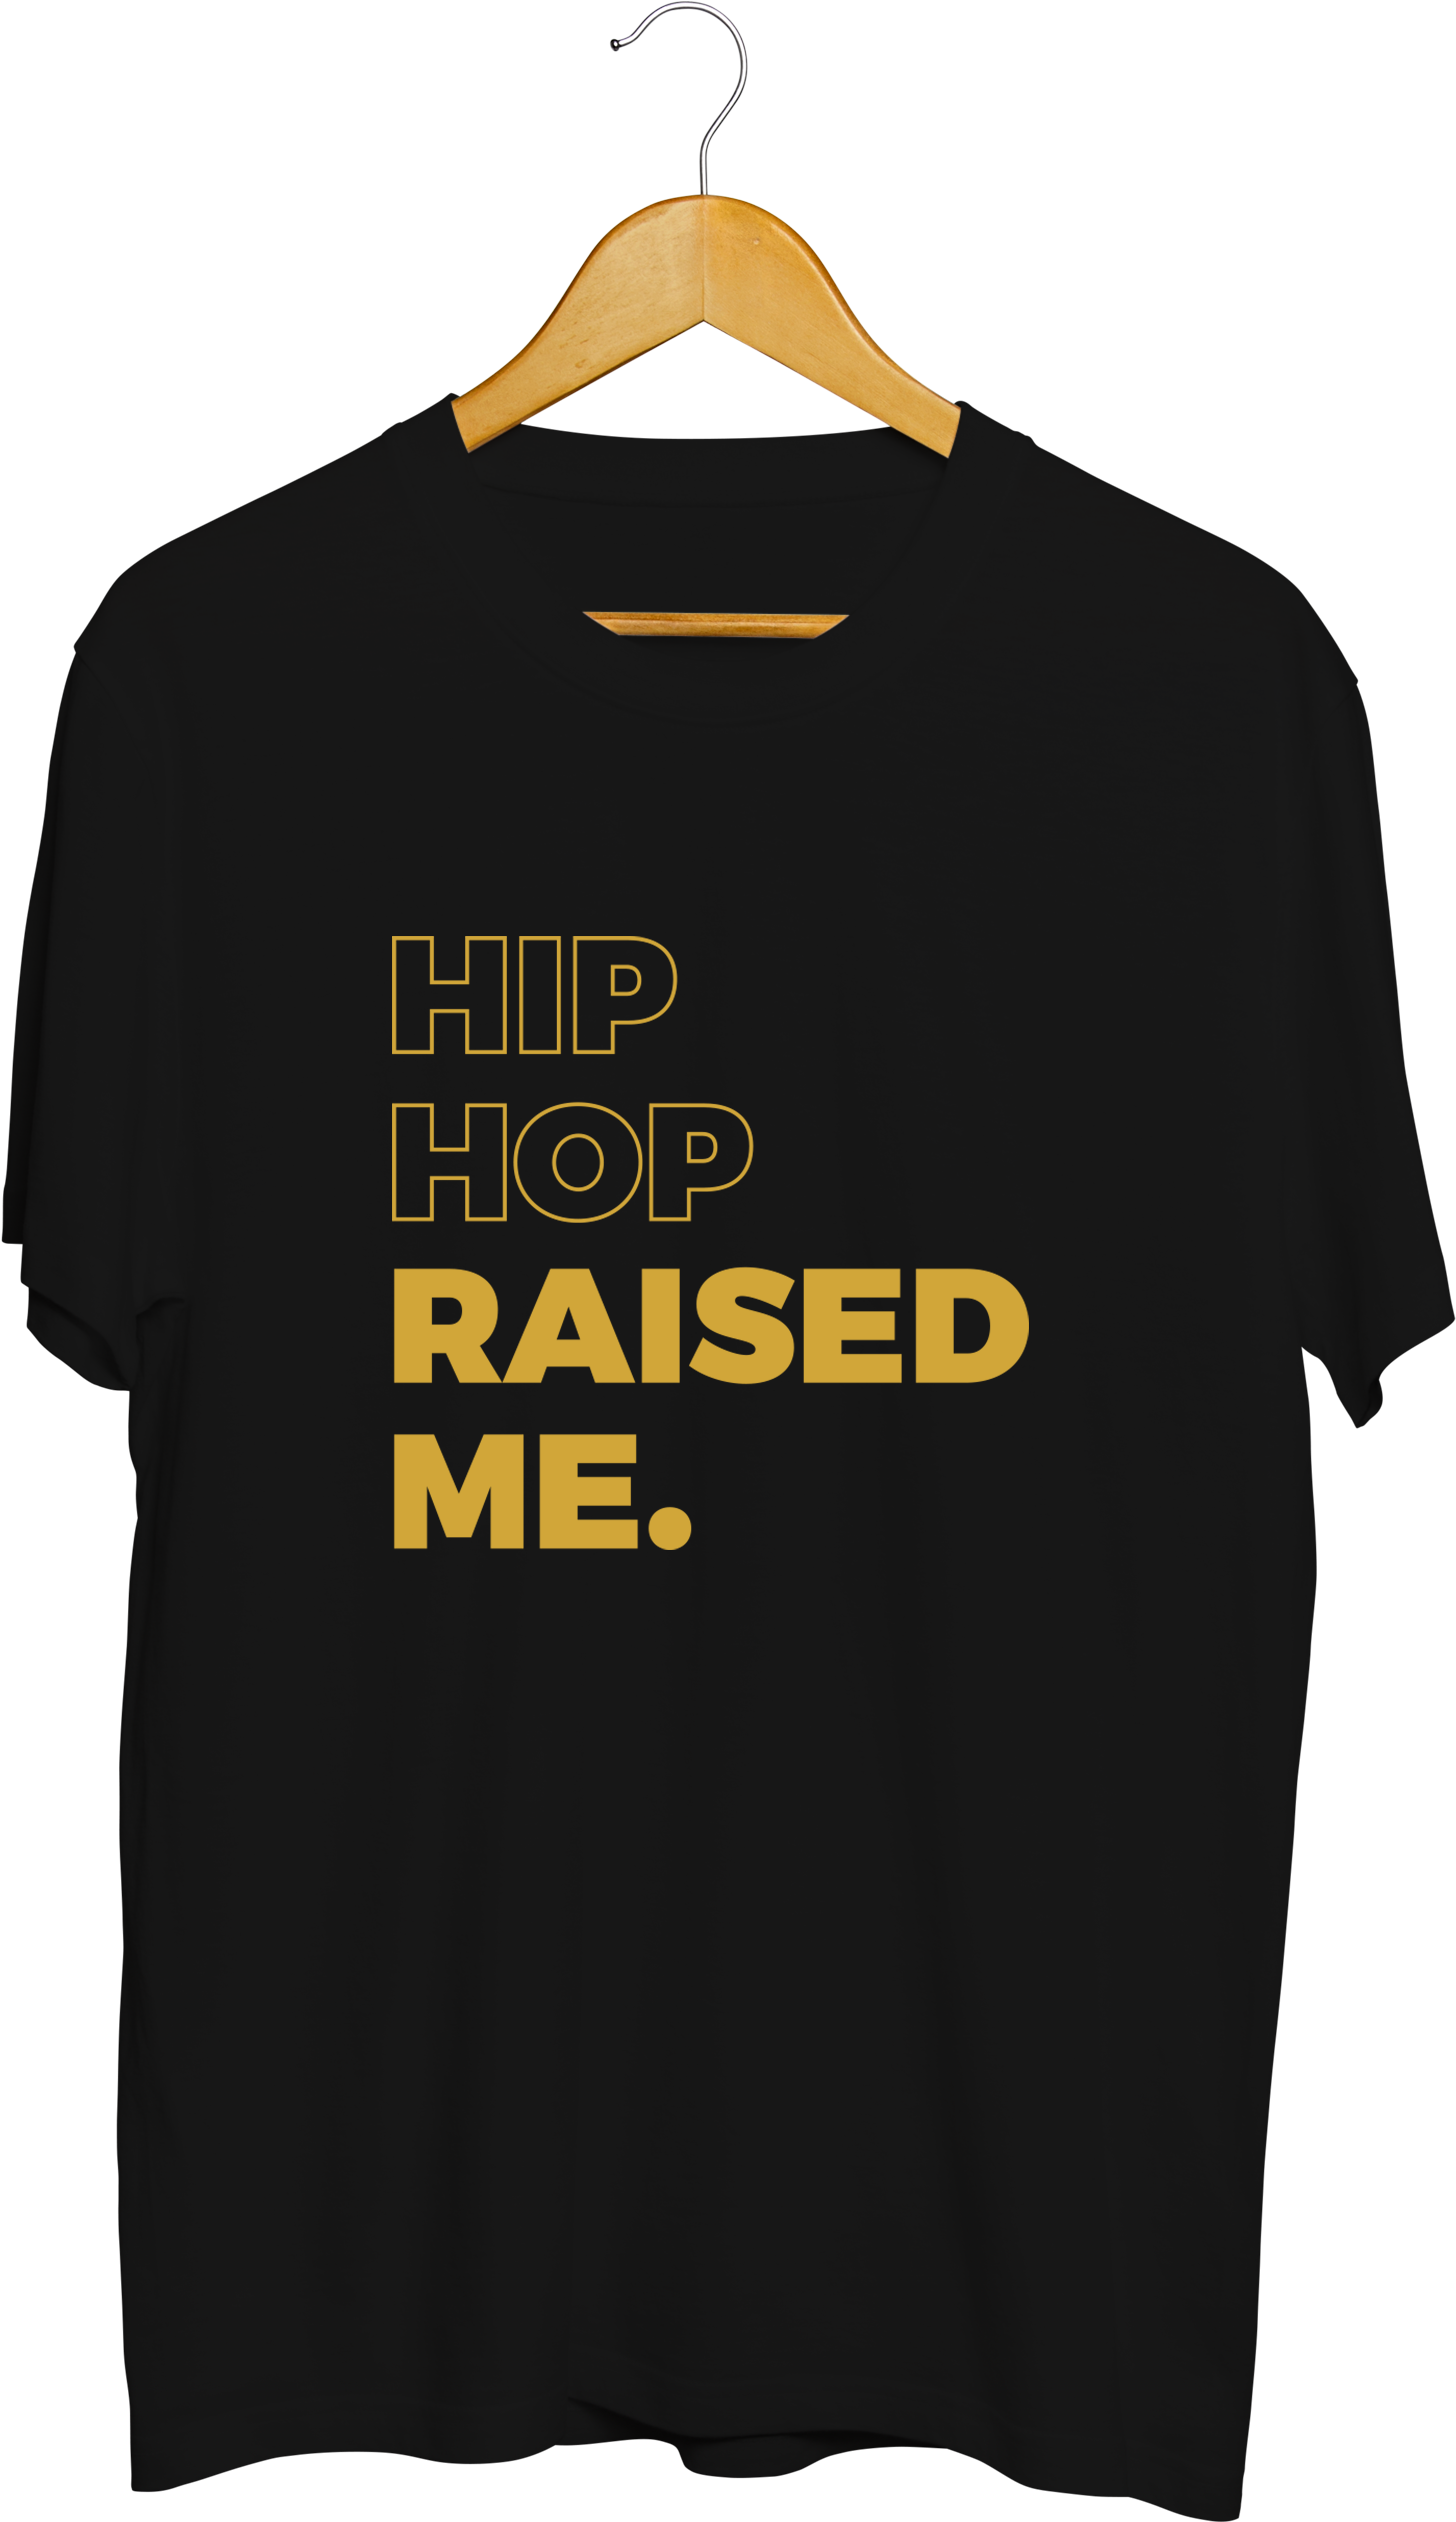 A Black Shirt With Gold Text